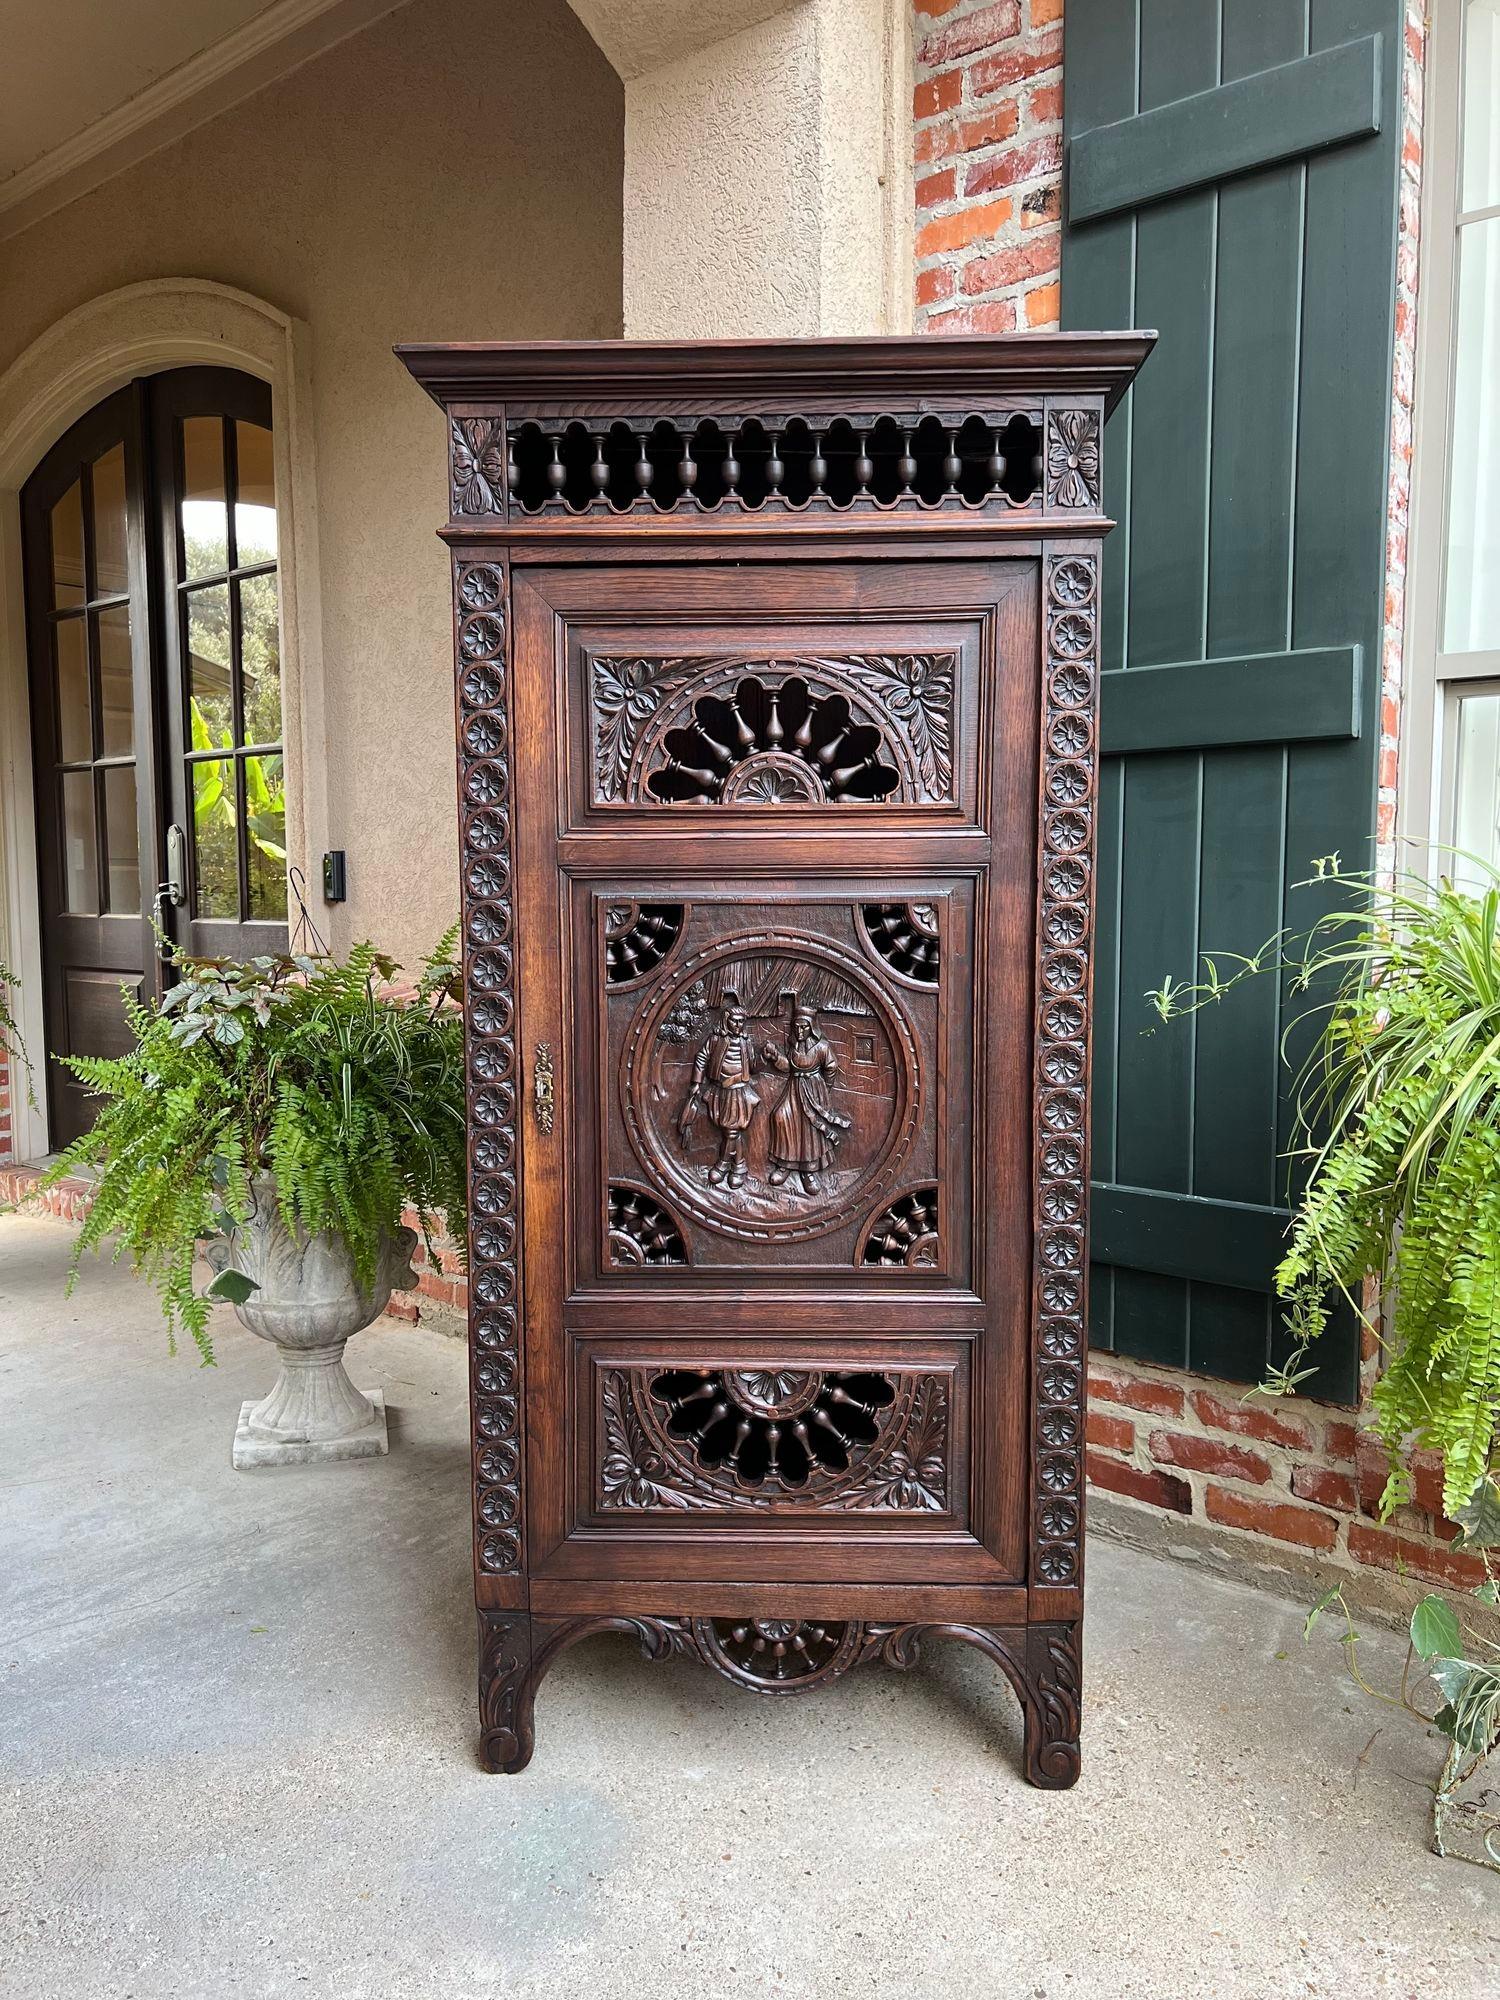 Antique French Carved Bonnetiere Armoire Cabinet Brittany Breton Ship Spindle.

Direct from France, a lovely antique French armoire or “bonnetiere” cabinet, with gorgeous hand carvings throughout.  The slender, smaller size makes a “bonnetiere”